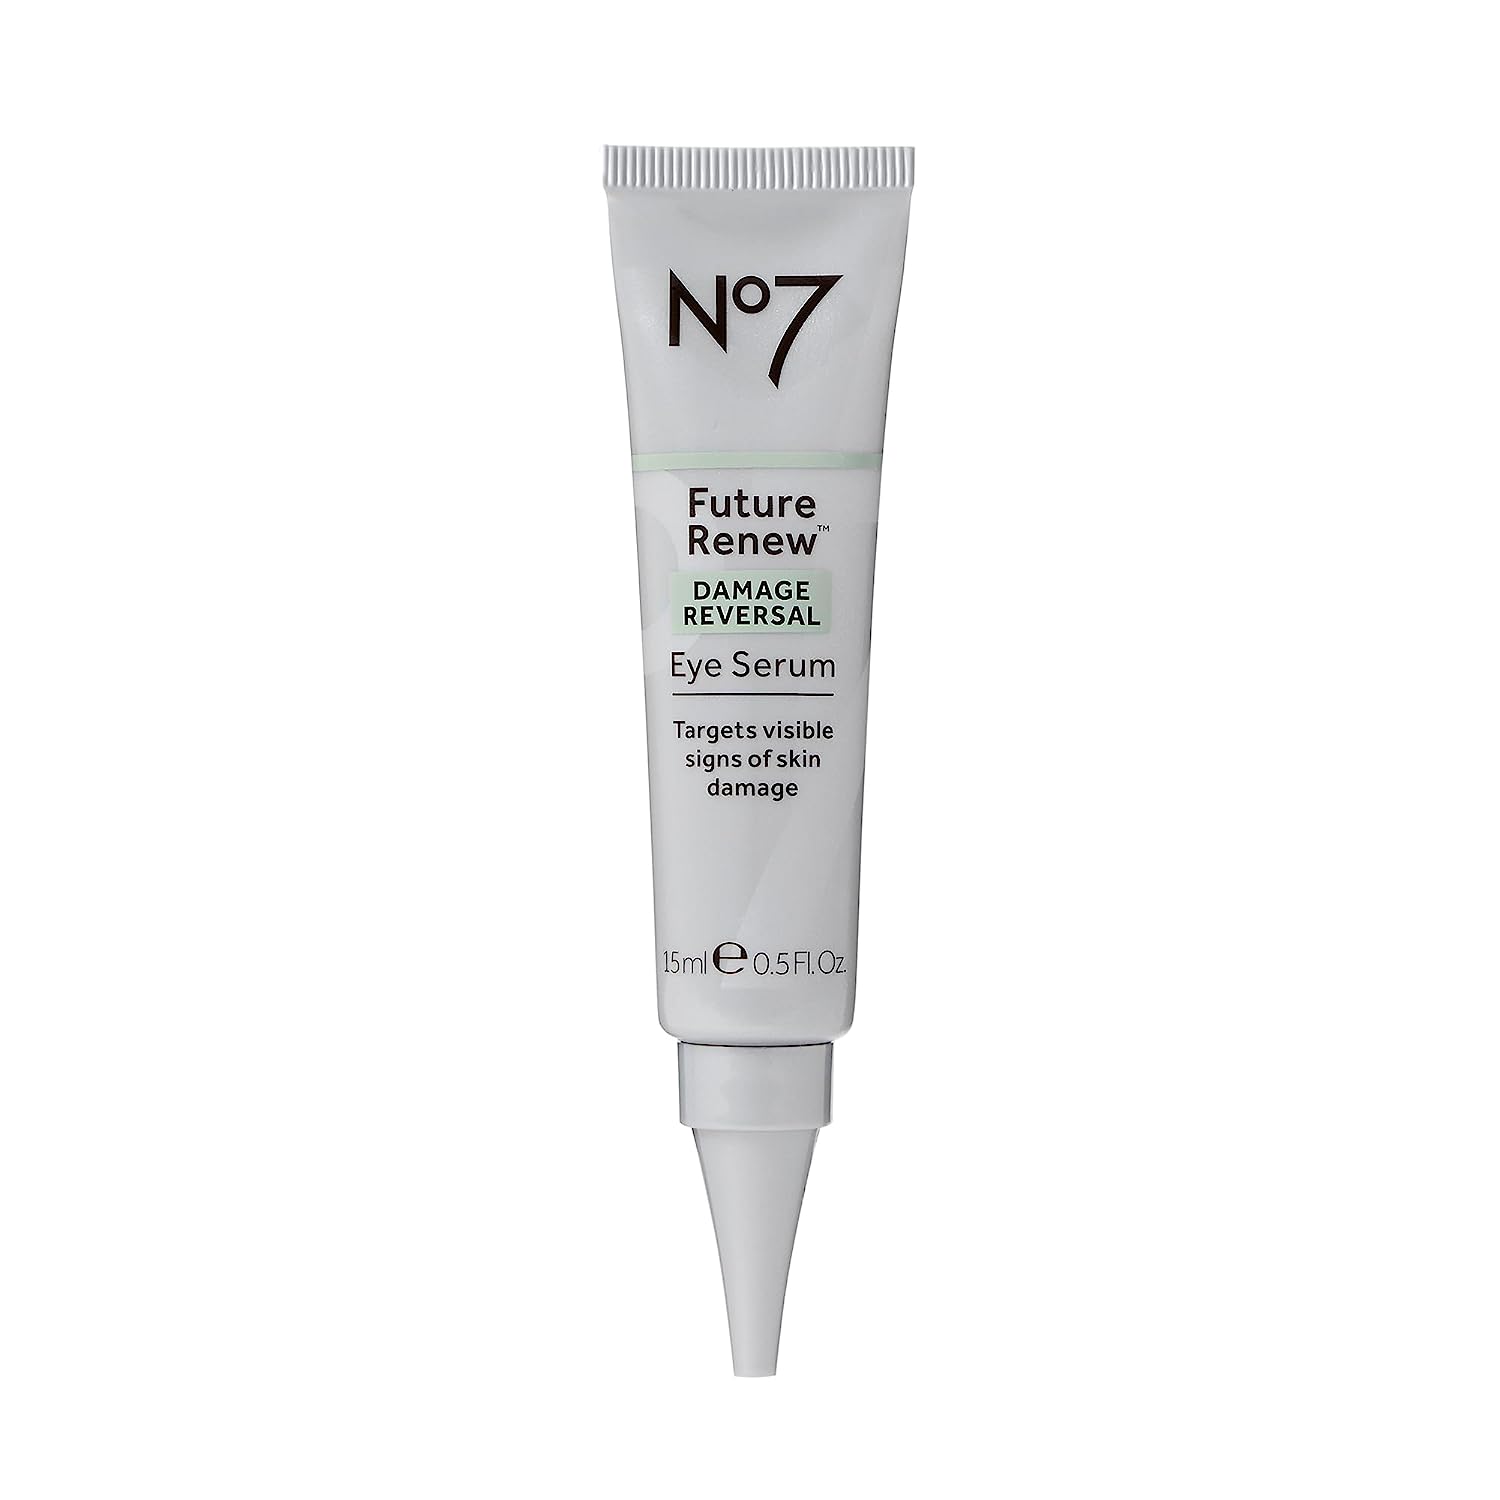 No7 Future Renew Damage Reversal Eye Serum - Daily Eye Serum with Hyaluronic Acid and Vitamin C for Aging Skin - Dermatologist-Approved, Suitable for Sensitive Skin (15)